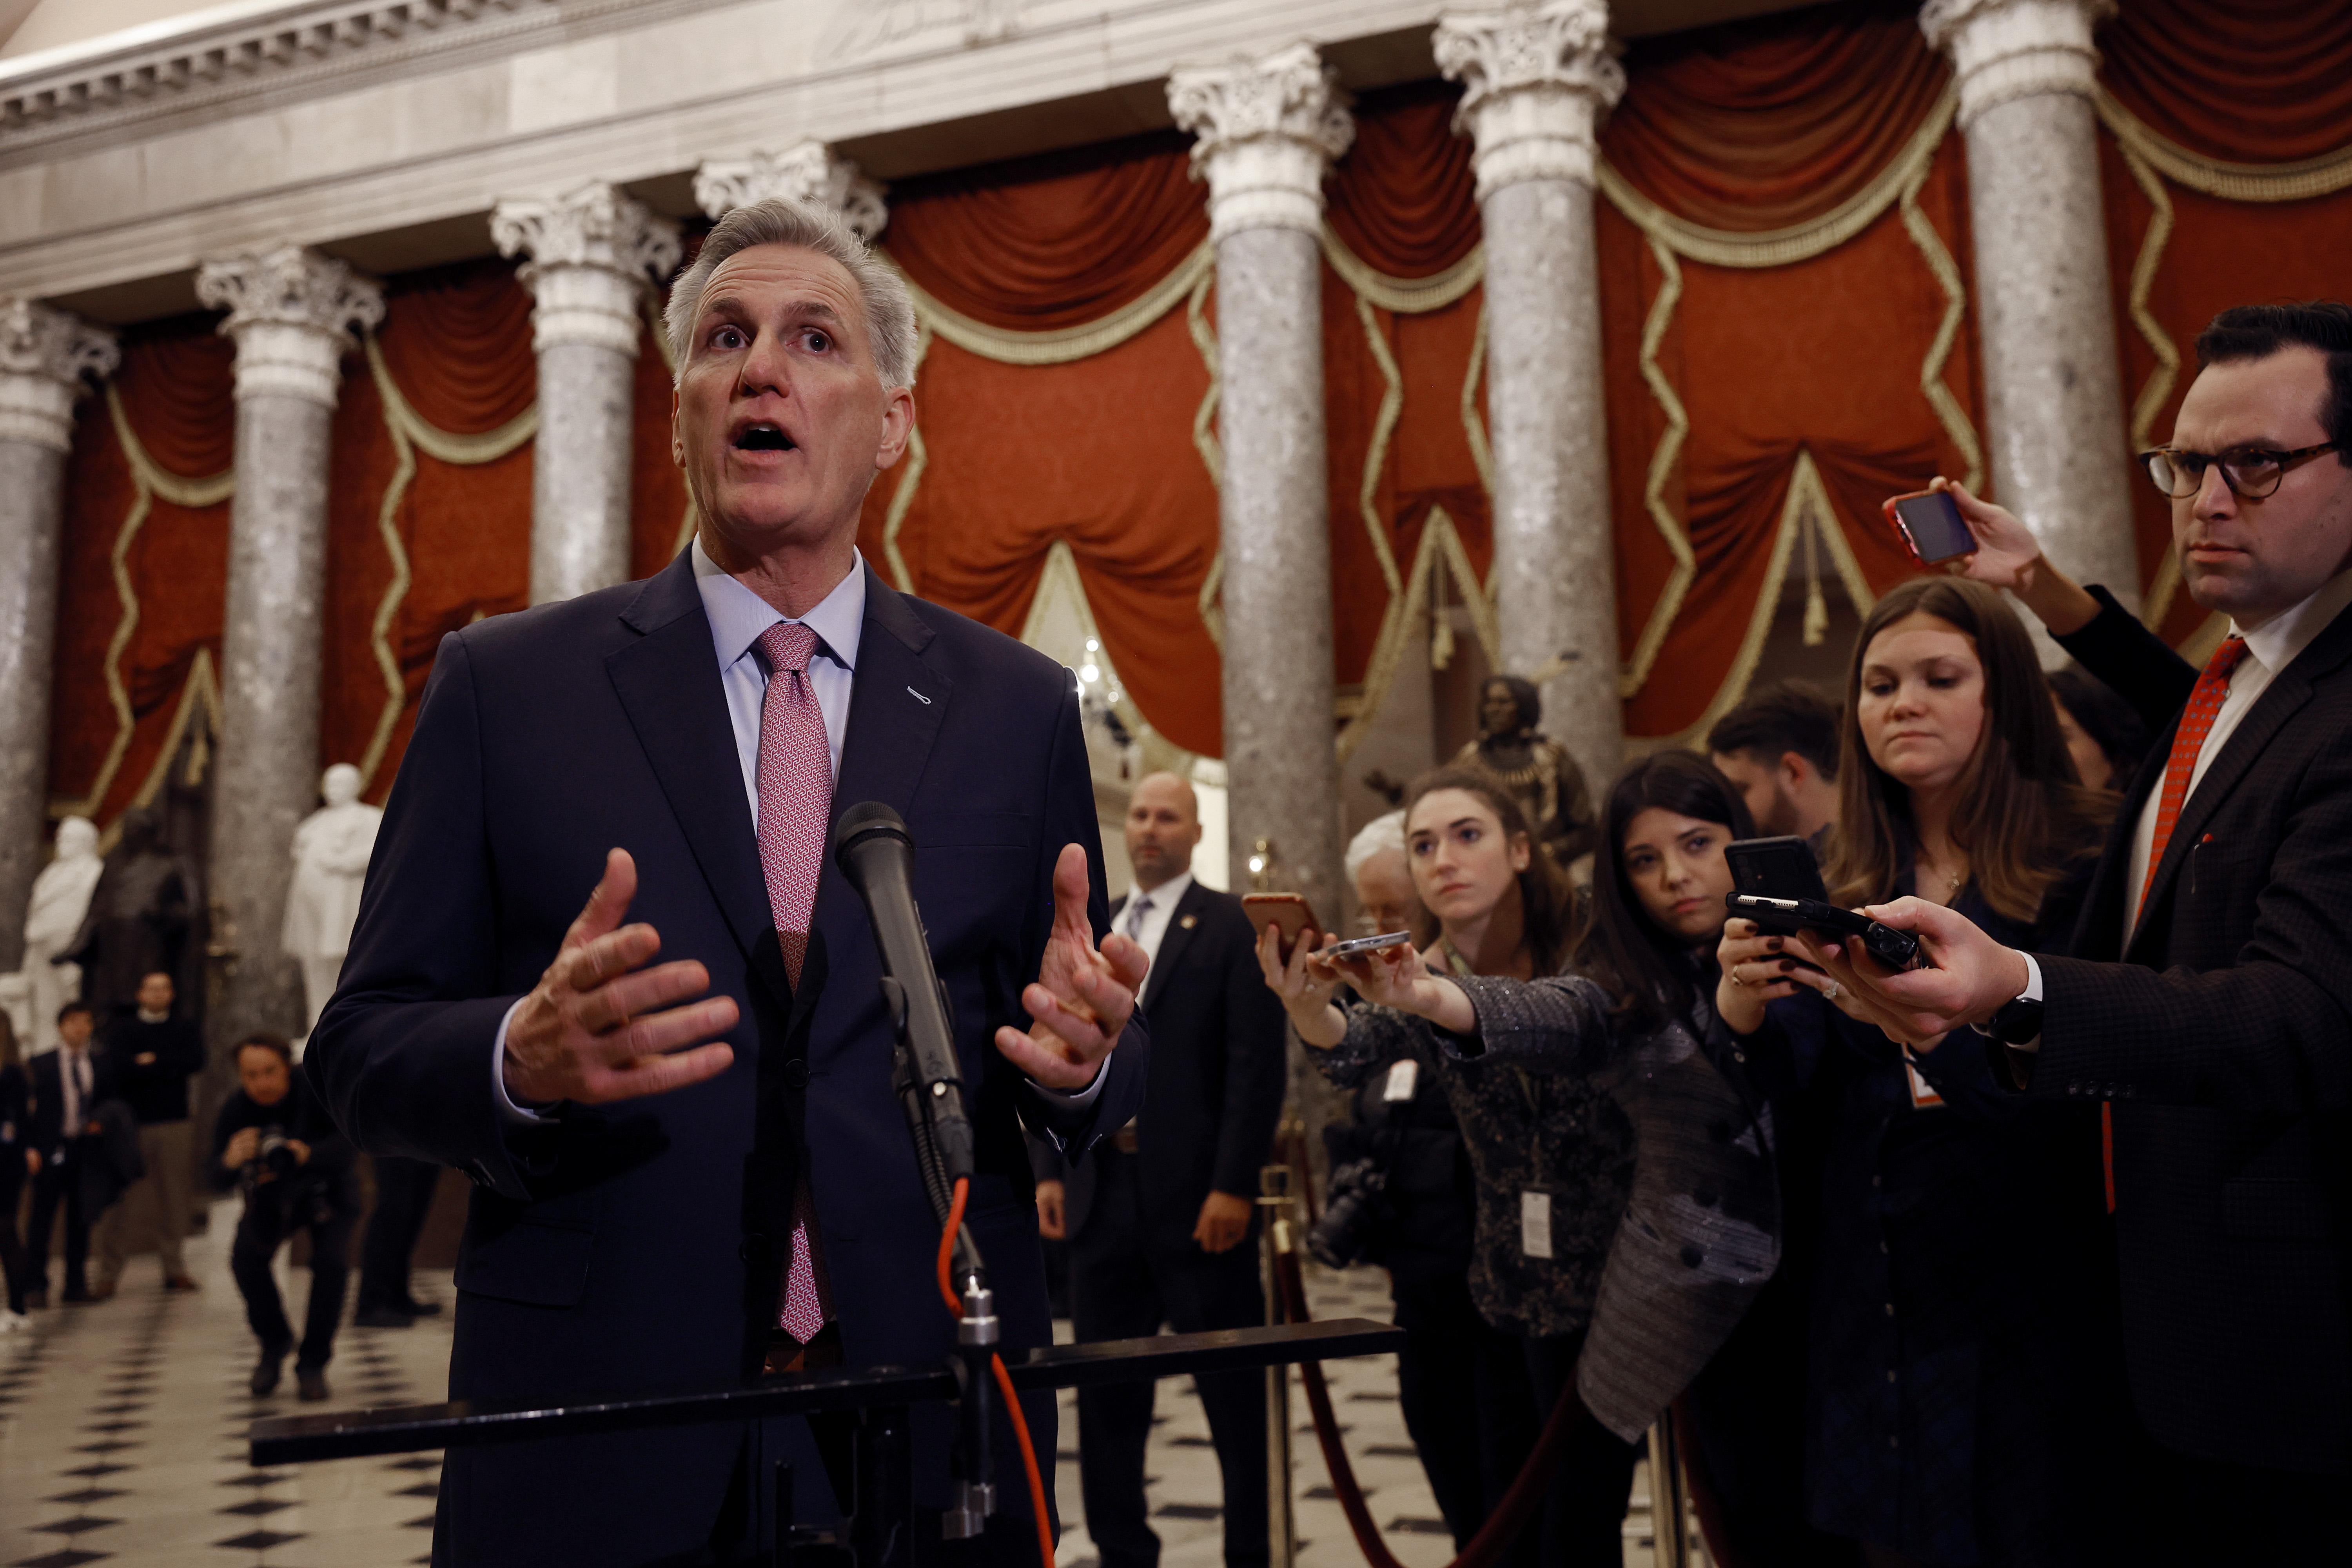 U.S. Speaker of the House Kevin McCarthy is standing in front of a row of reporters.